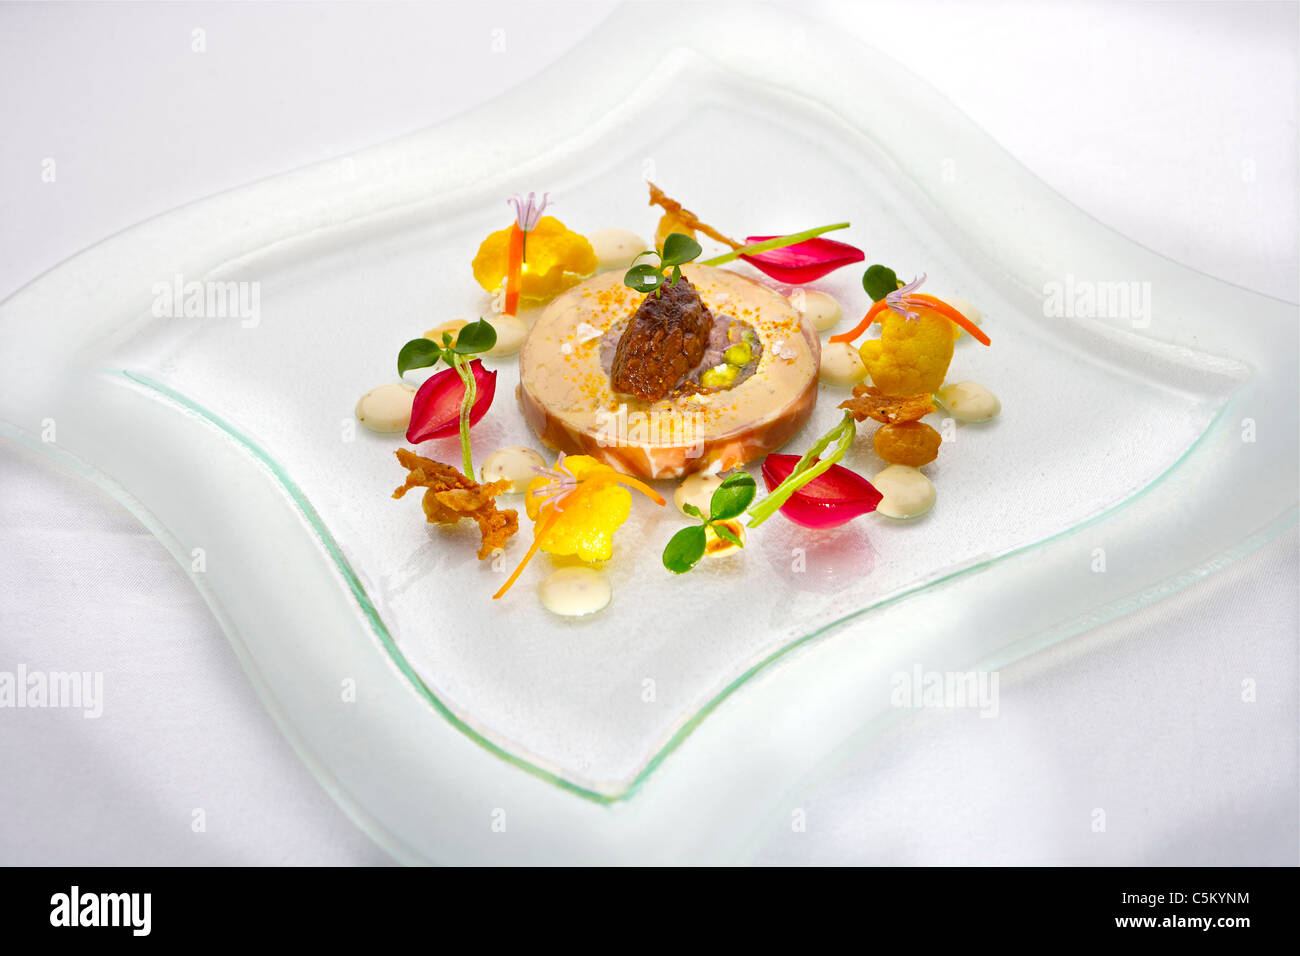 A plate of Pate de Foie Gras served on a glass plate Stock Photo